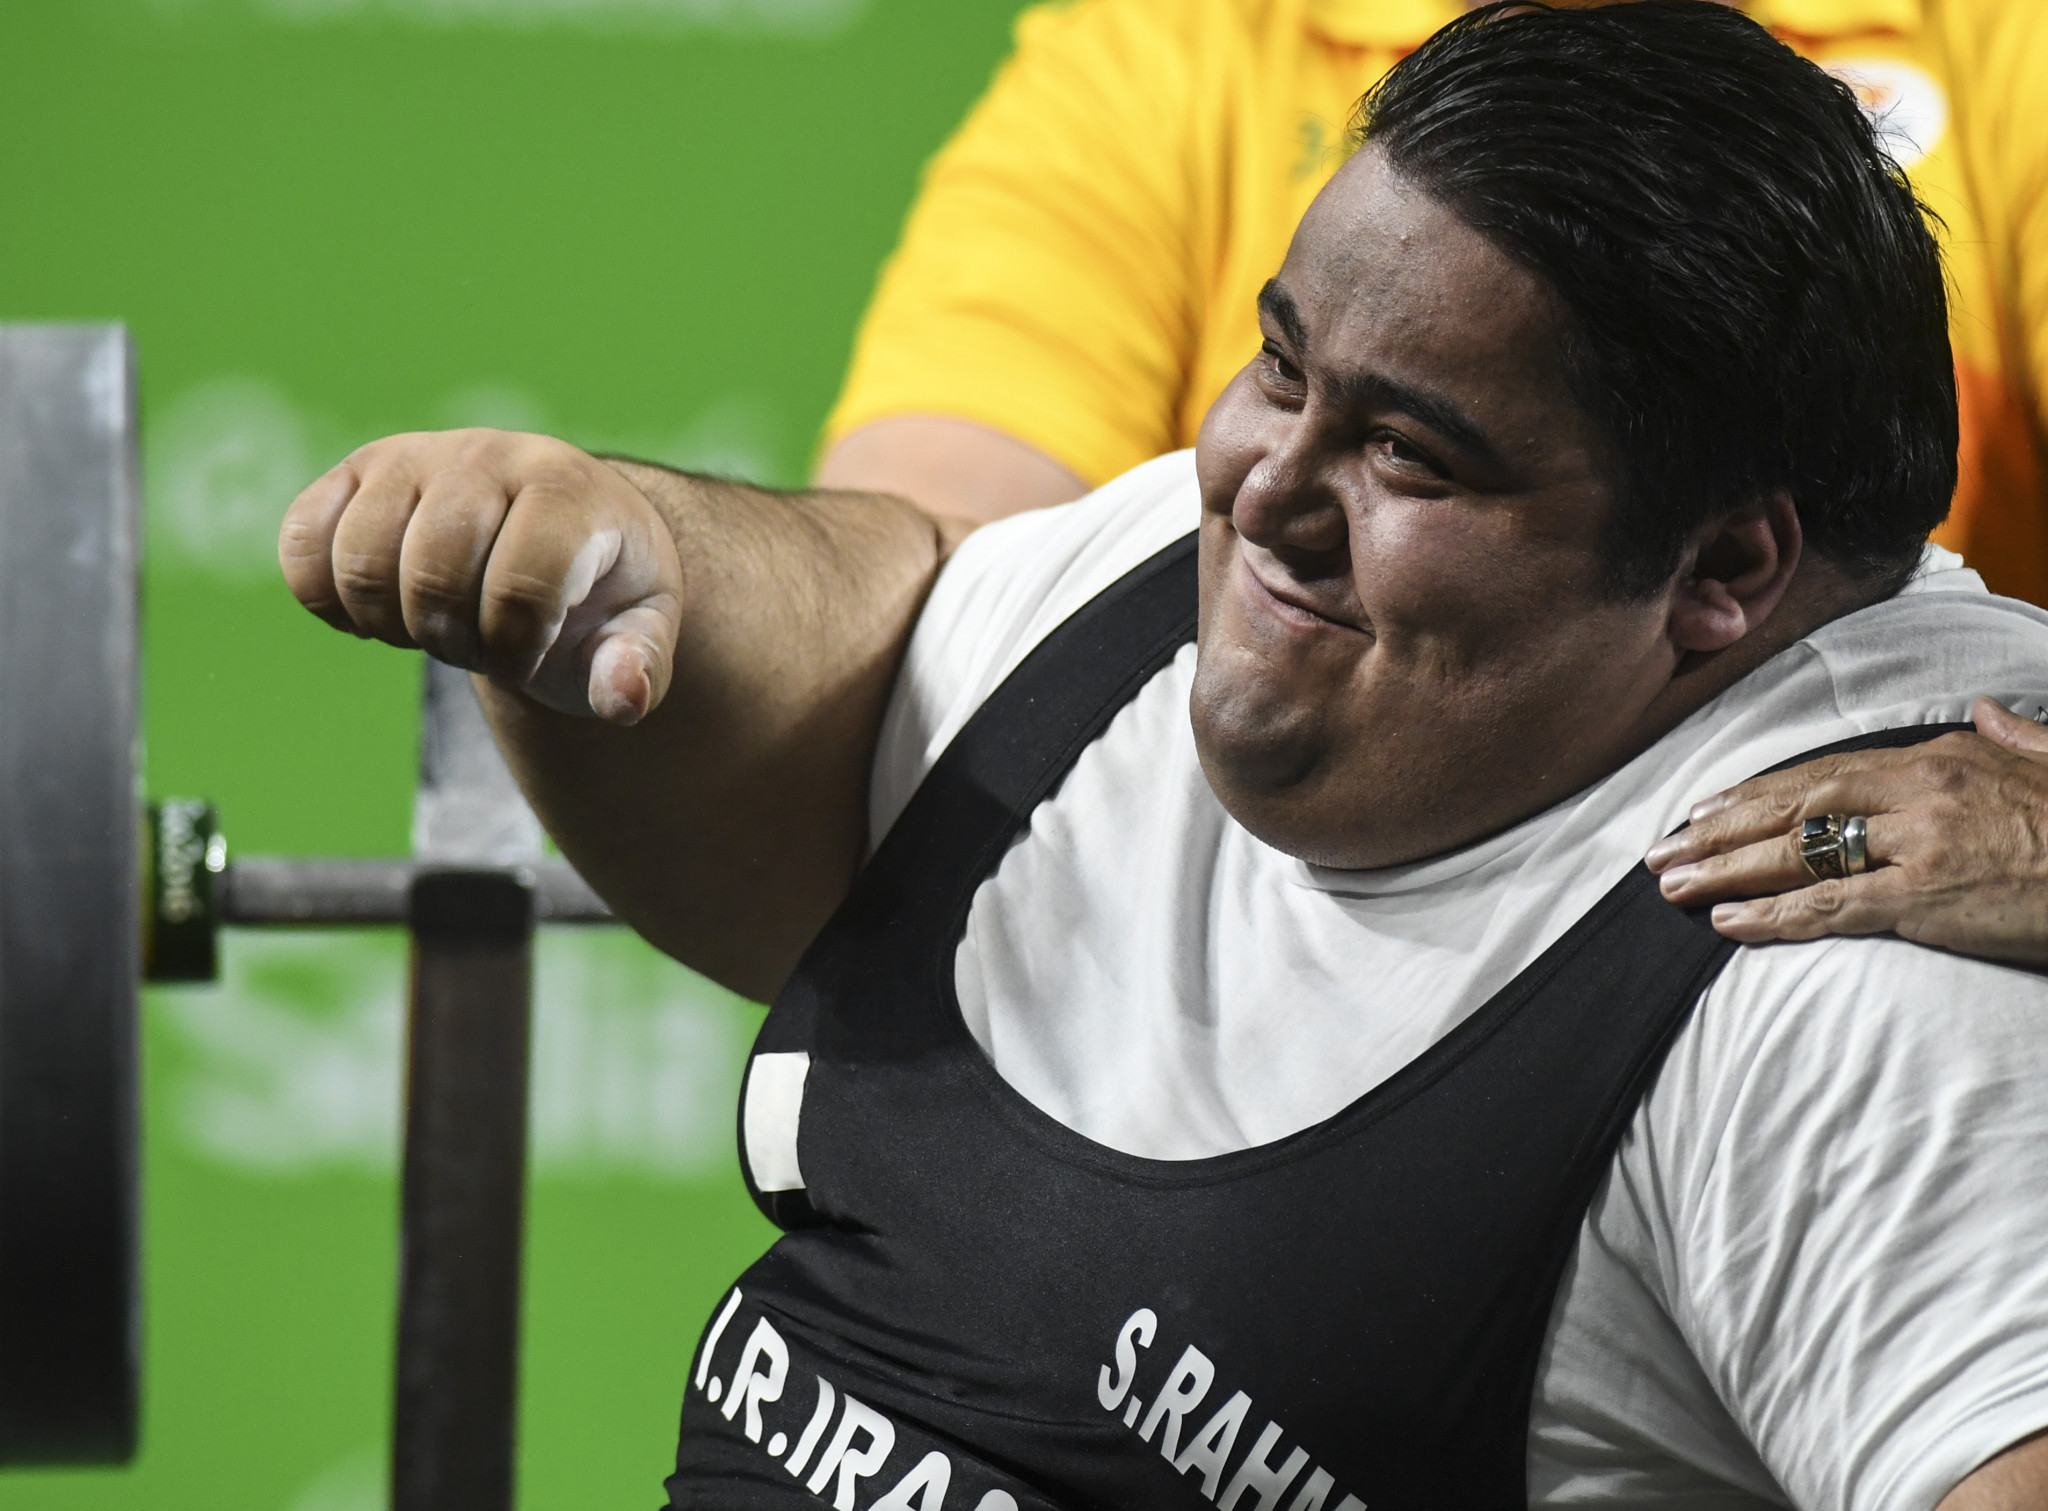 Iran's Siamand Rahman has been shortlisted for the Best Powerlifter of 2018 award following his performance at the Asia-Oceania Open Championships ©Getty Images